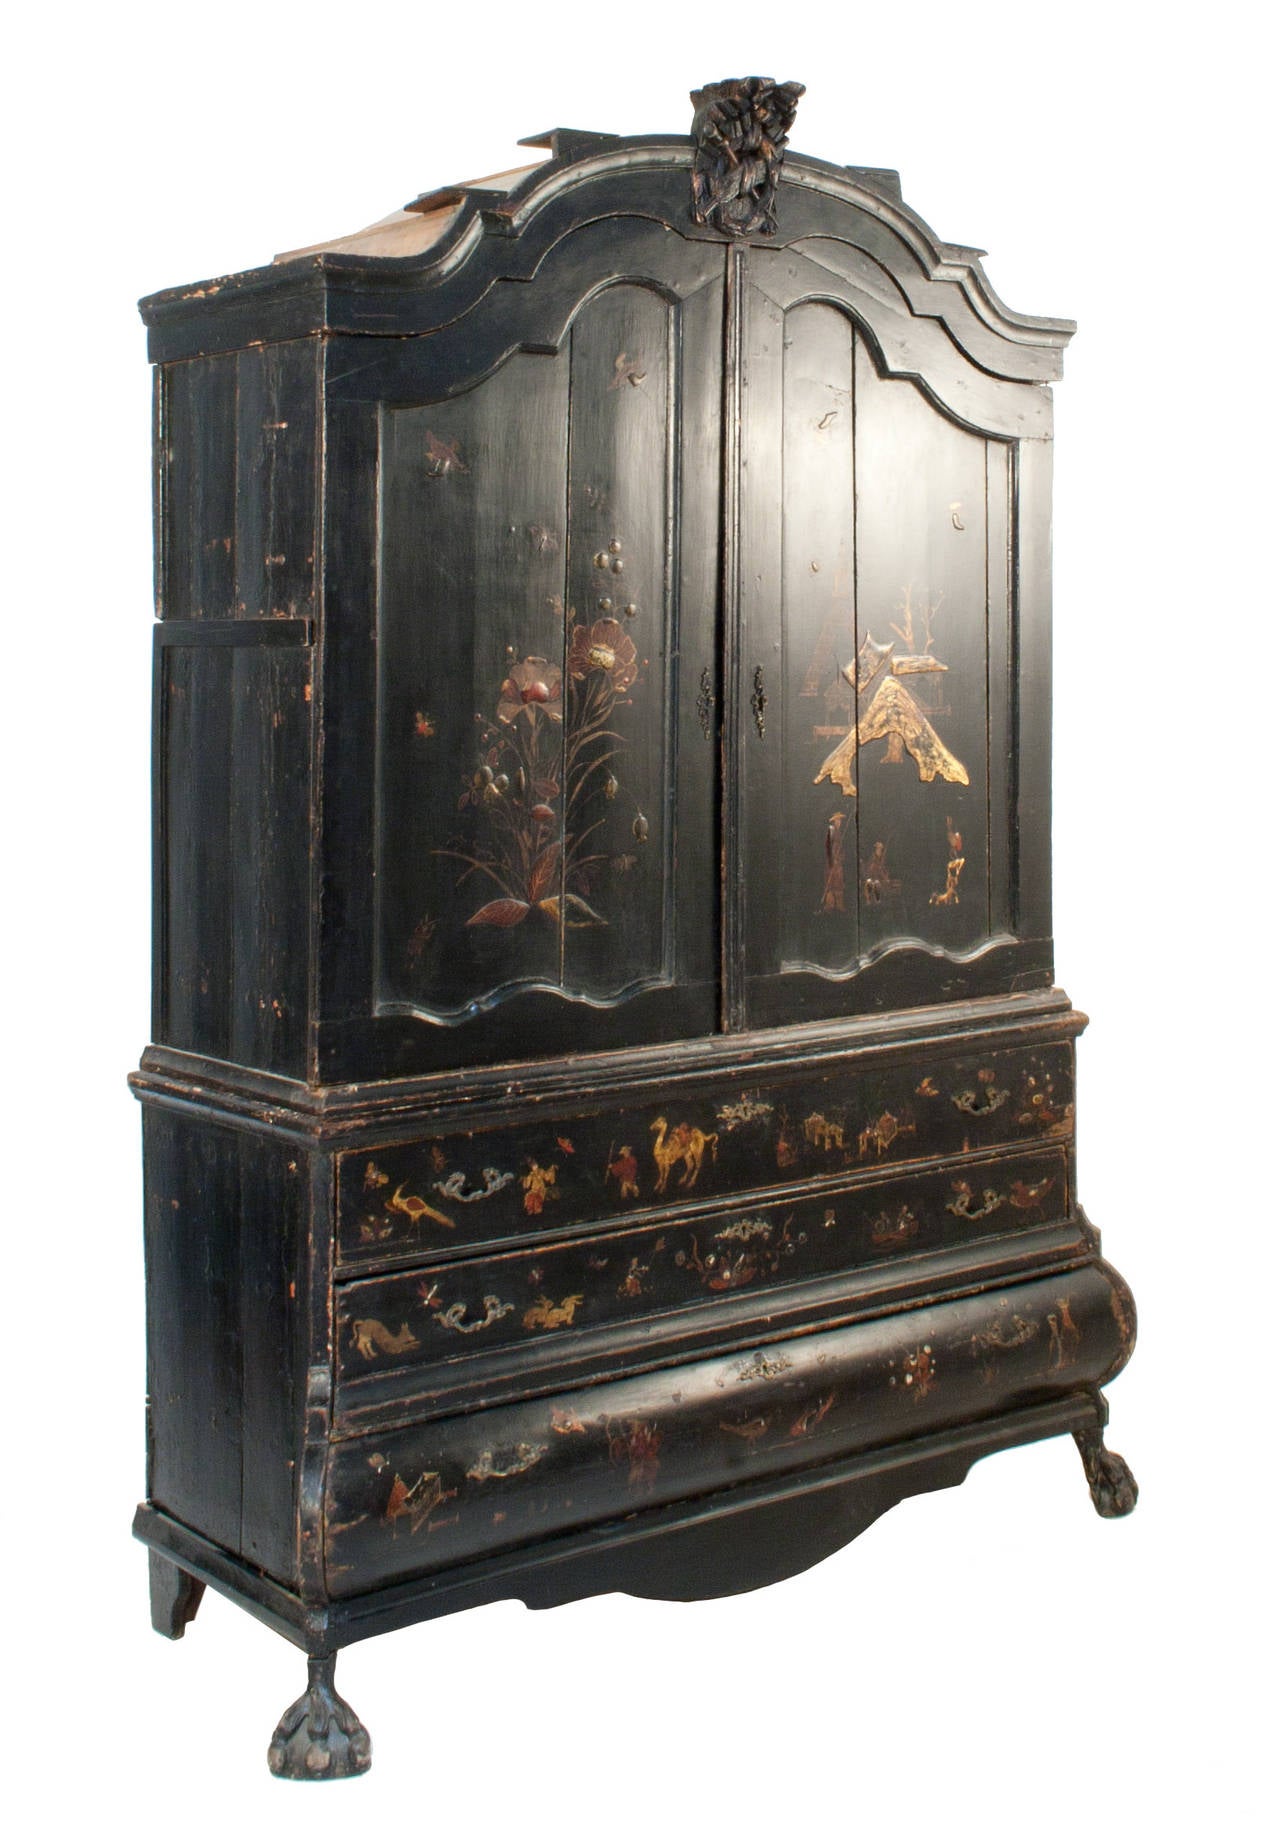 Ebonized Baroque cabinet with chinoiserie. This piece is one of the early examples in Sweden of the new found influence from the orient. Extremely rare and created around the time the Chinese Pavilion was built on the grounds of the Swedish Royal